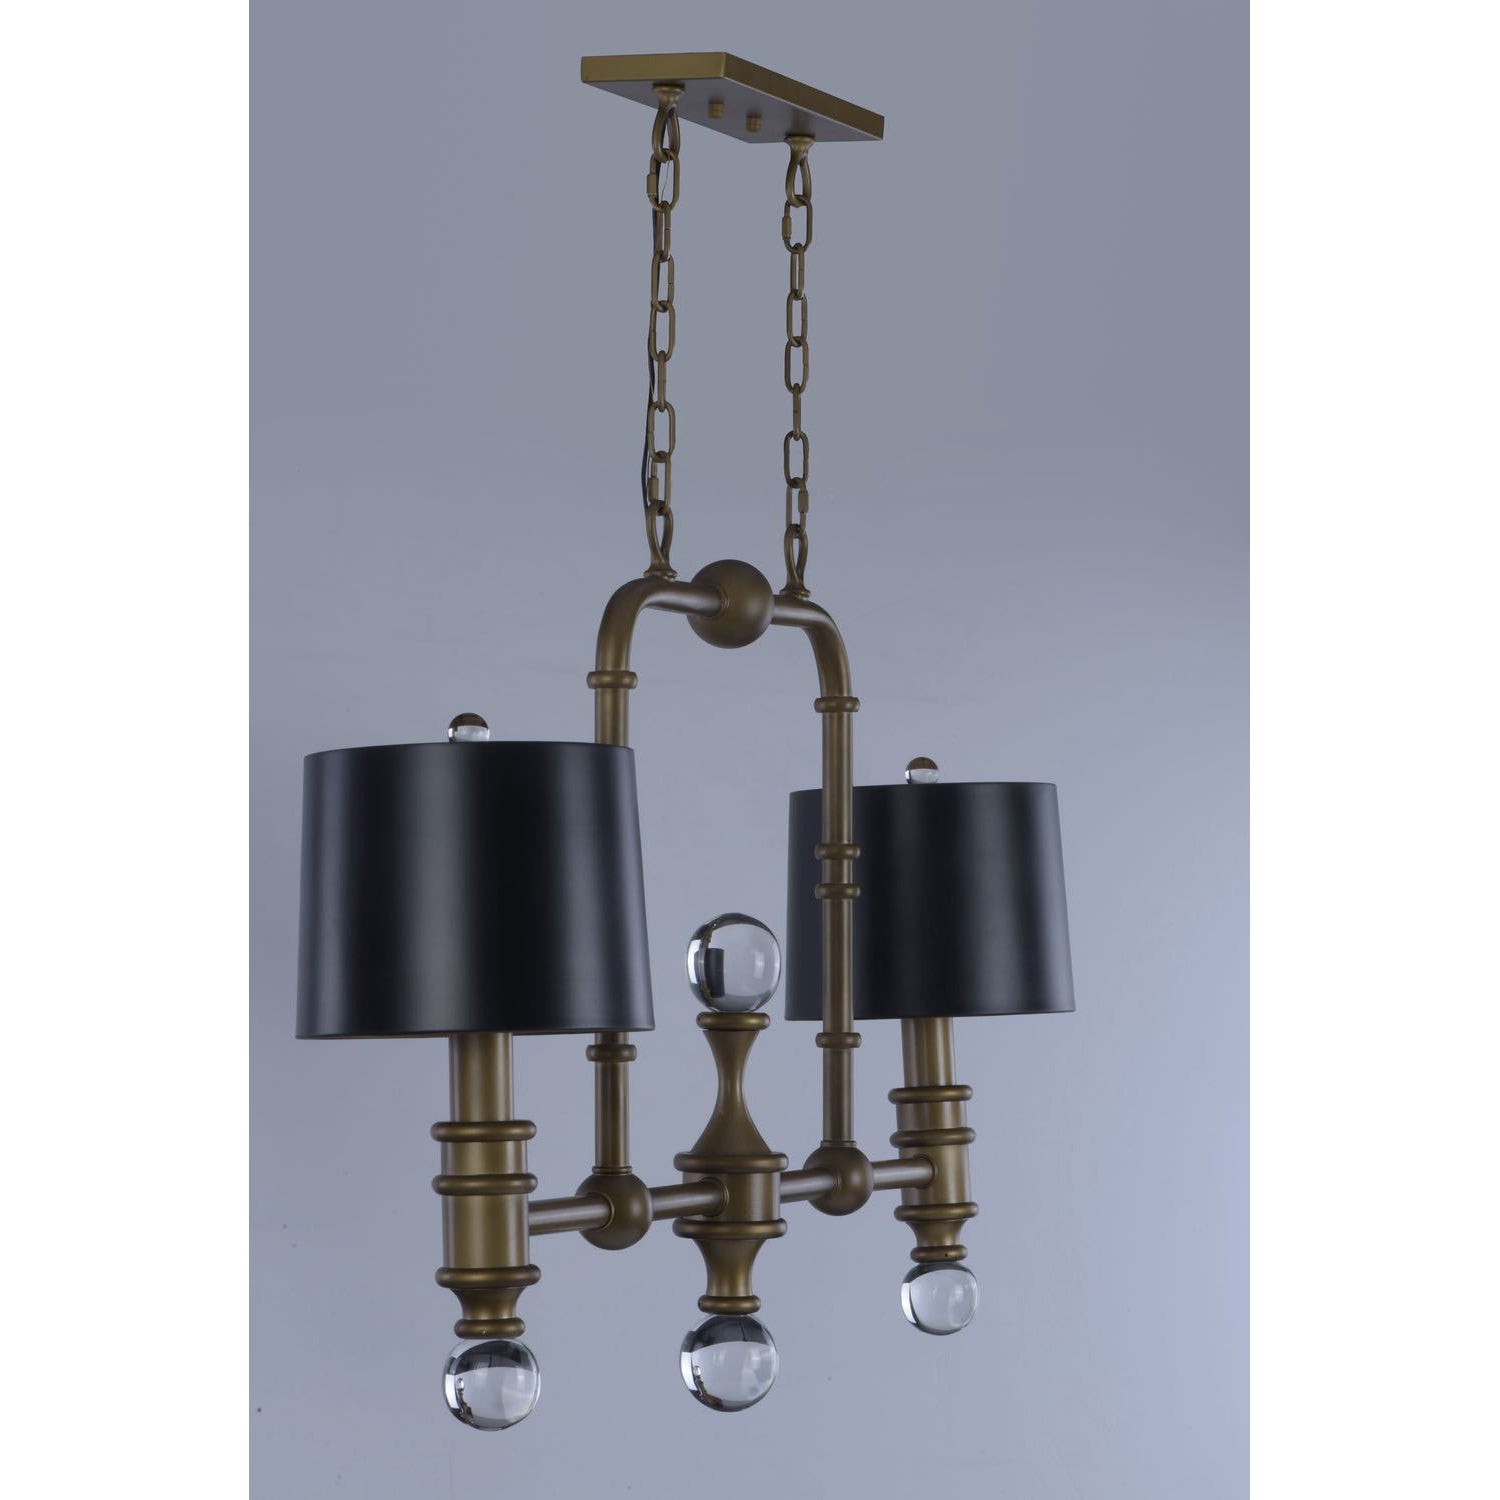 Saloon Linear Suspension Weathered Brass